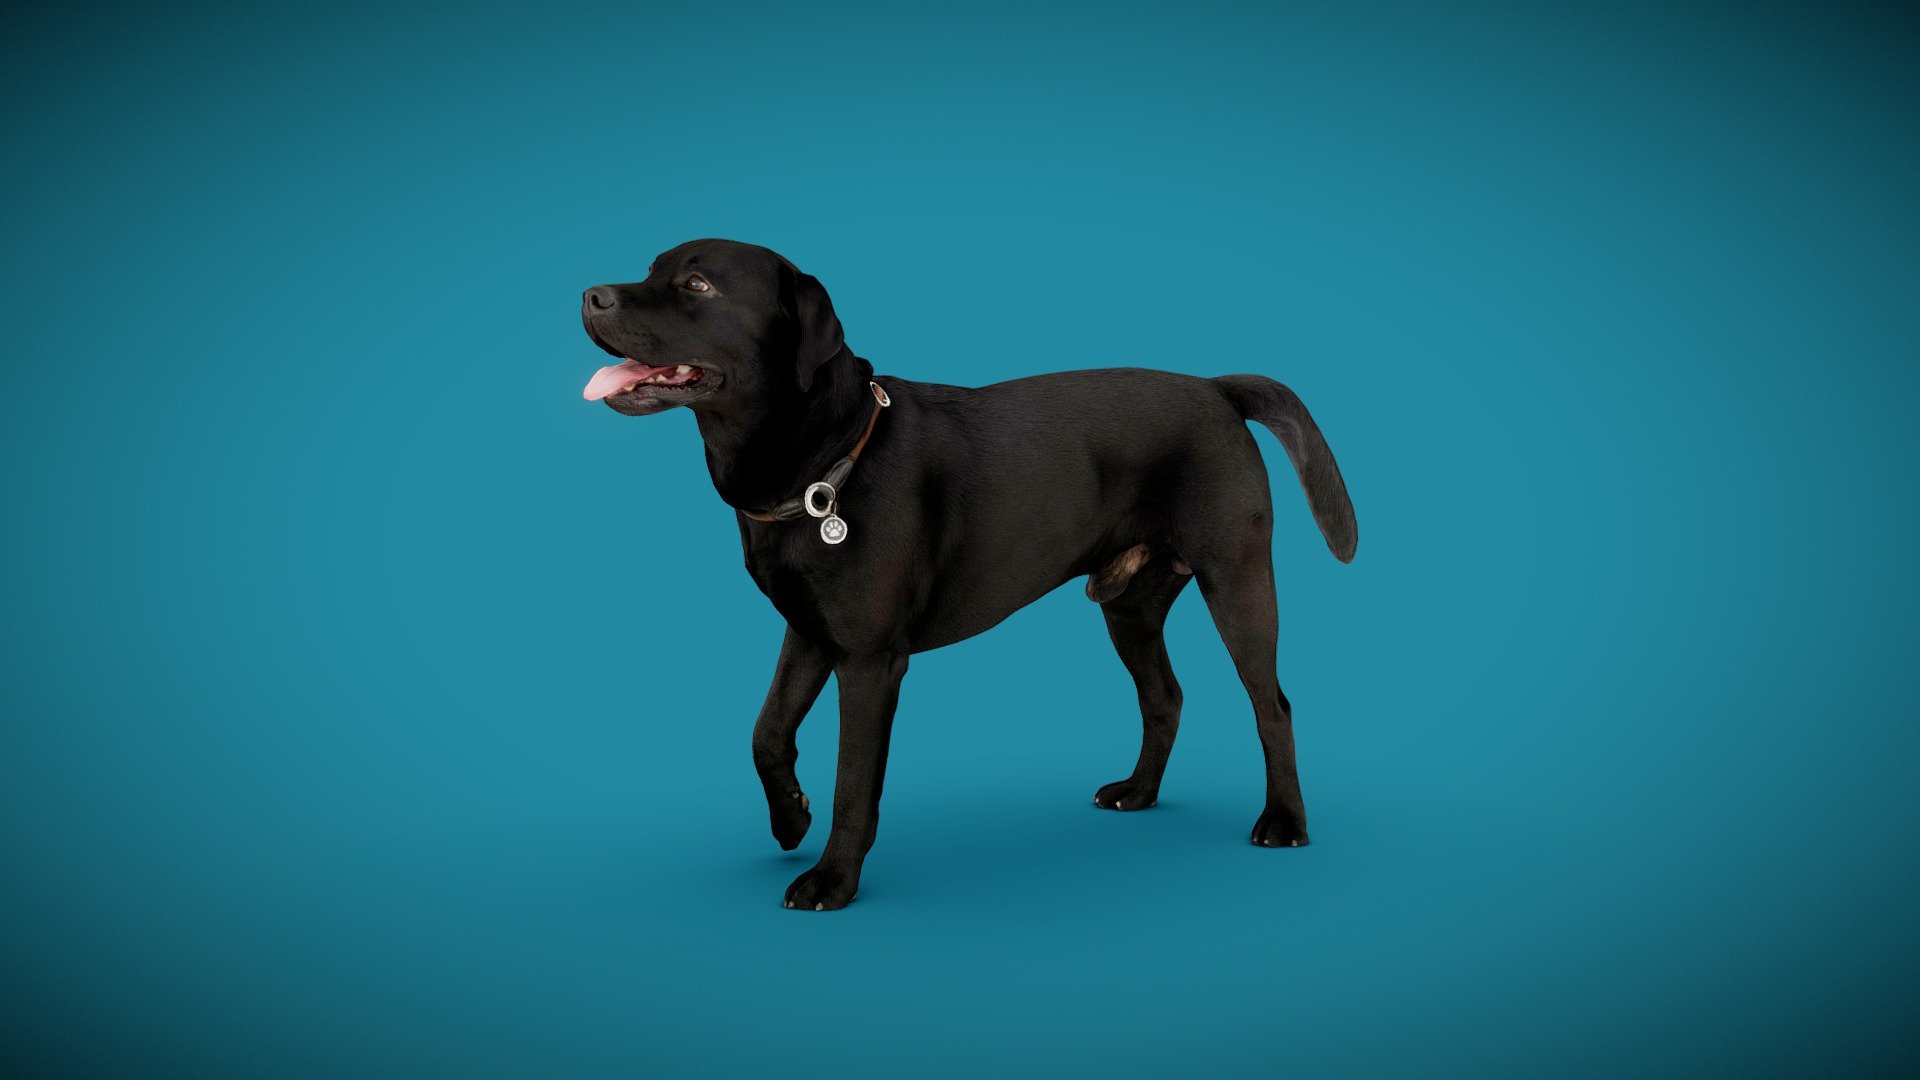 3d-dog-scan using photogrammetry technique // more poses and packages avaiable*


3D-Model approx. 50K triangles
4K DiffuseColorTexture
real scale
watertight

3d-ScanService: https://www.optimission.de

*
https://skfb.ly/o8q9P
https://skfb.ly/o8q9Q
https://skfb.ly/o8q9S - DOG A - 4of6 - Buy Royalty Free 3D model by Frank.Zwick (@Frank_Zwick) 3d model